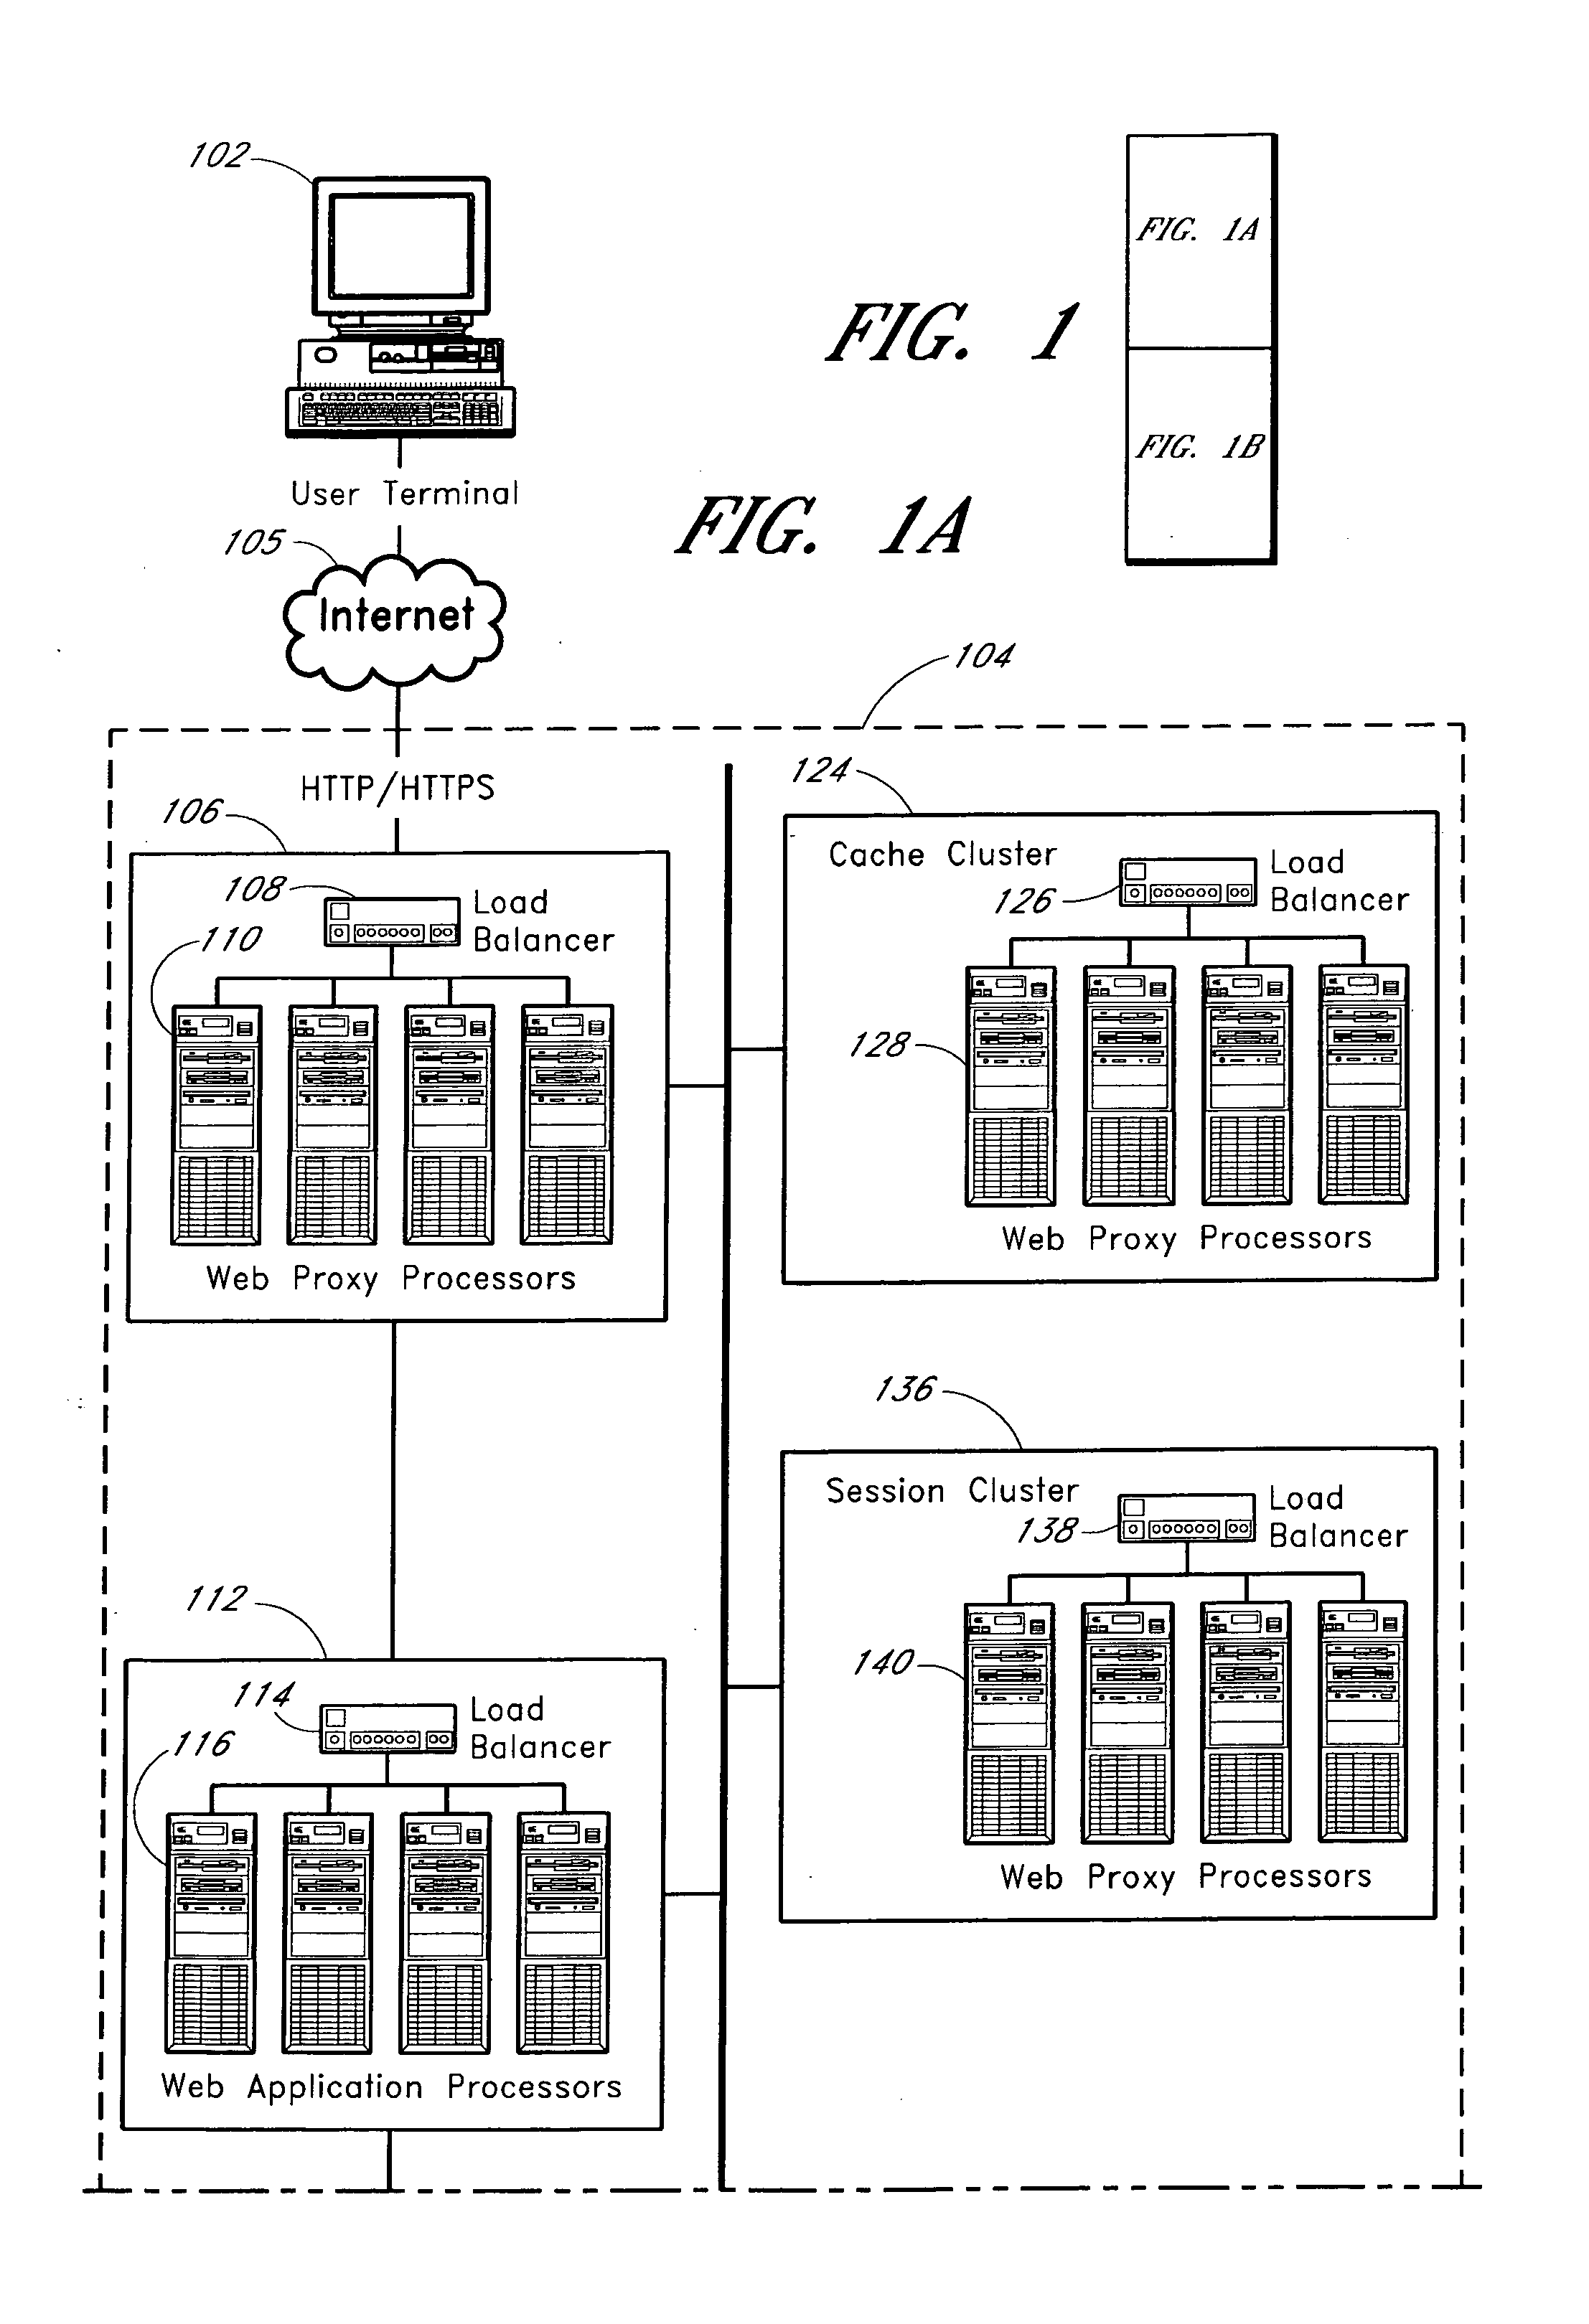 Computer-implemented systems and methods for resource allocation